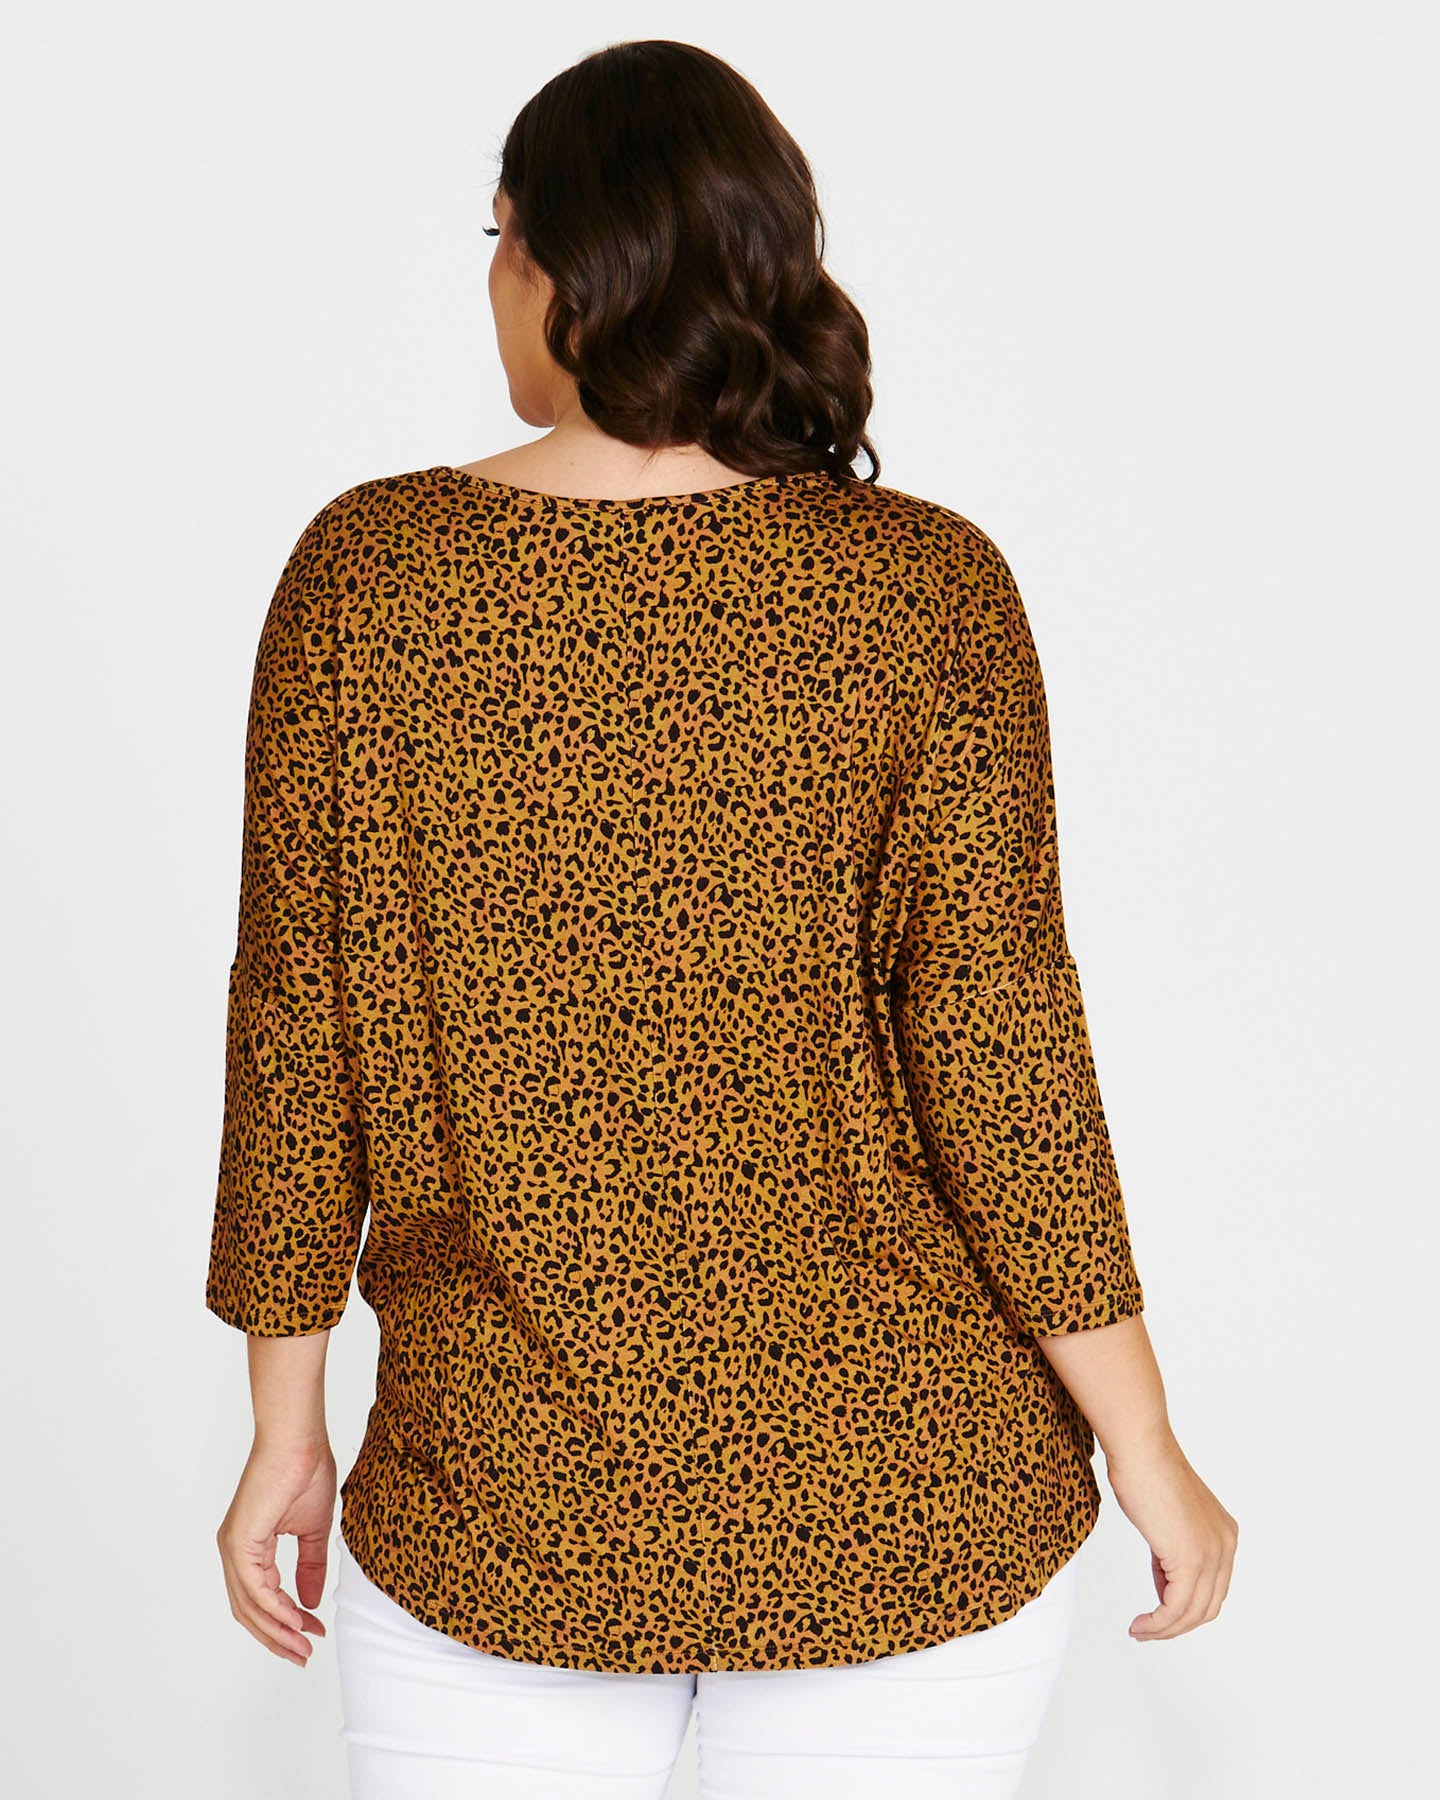 Milan Stretchy Draped Relaxed 3/4 Sleeve Basic Top - Wild Leopard Print